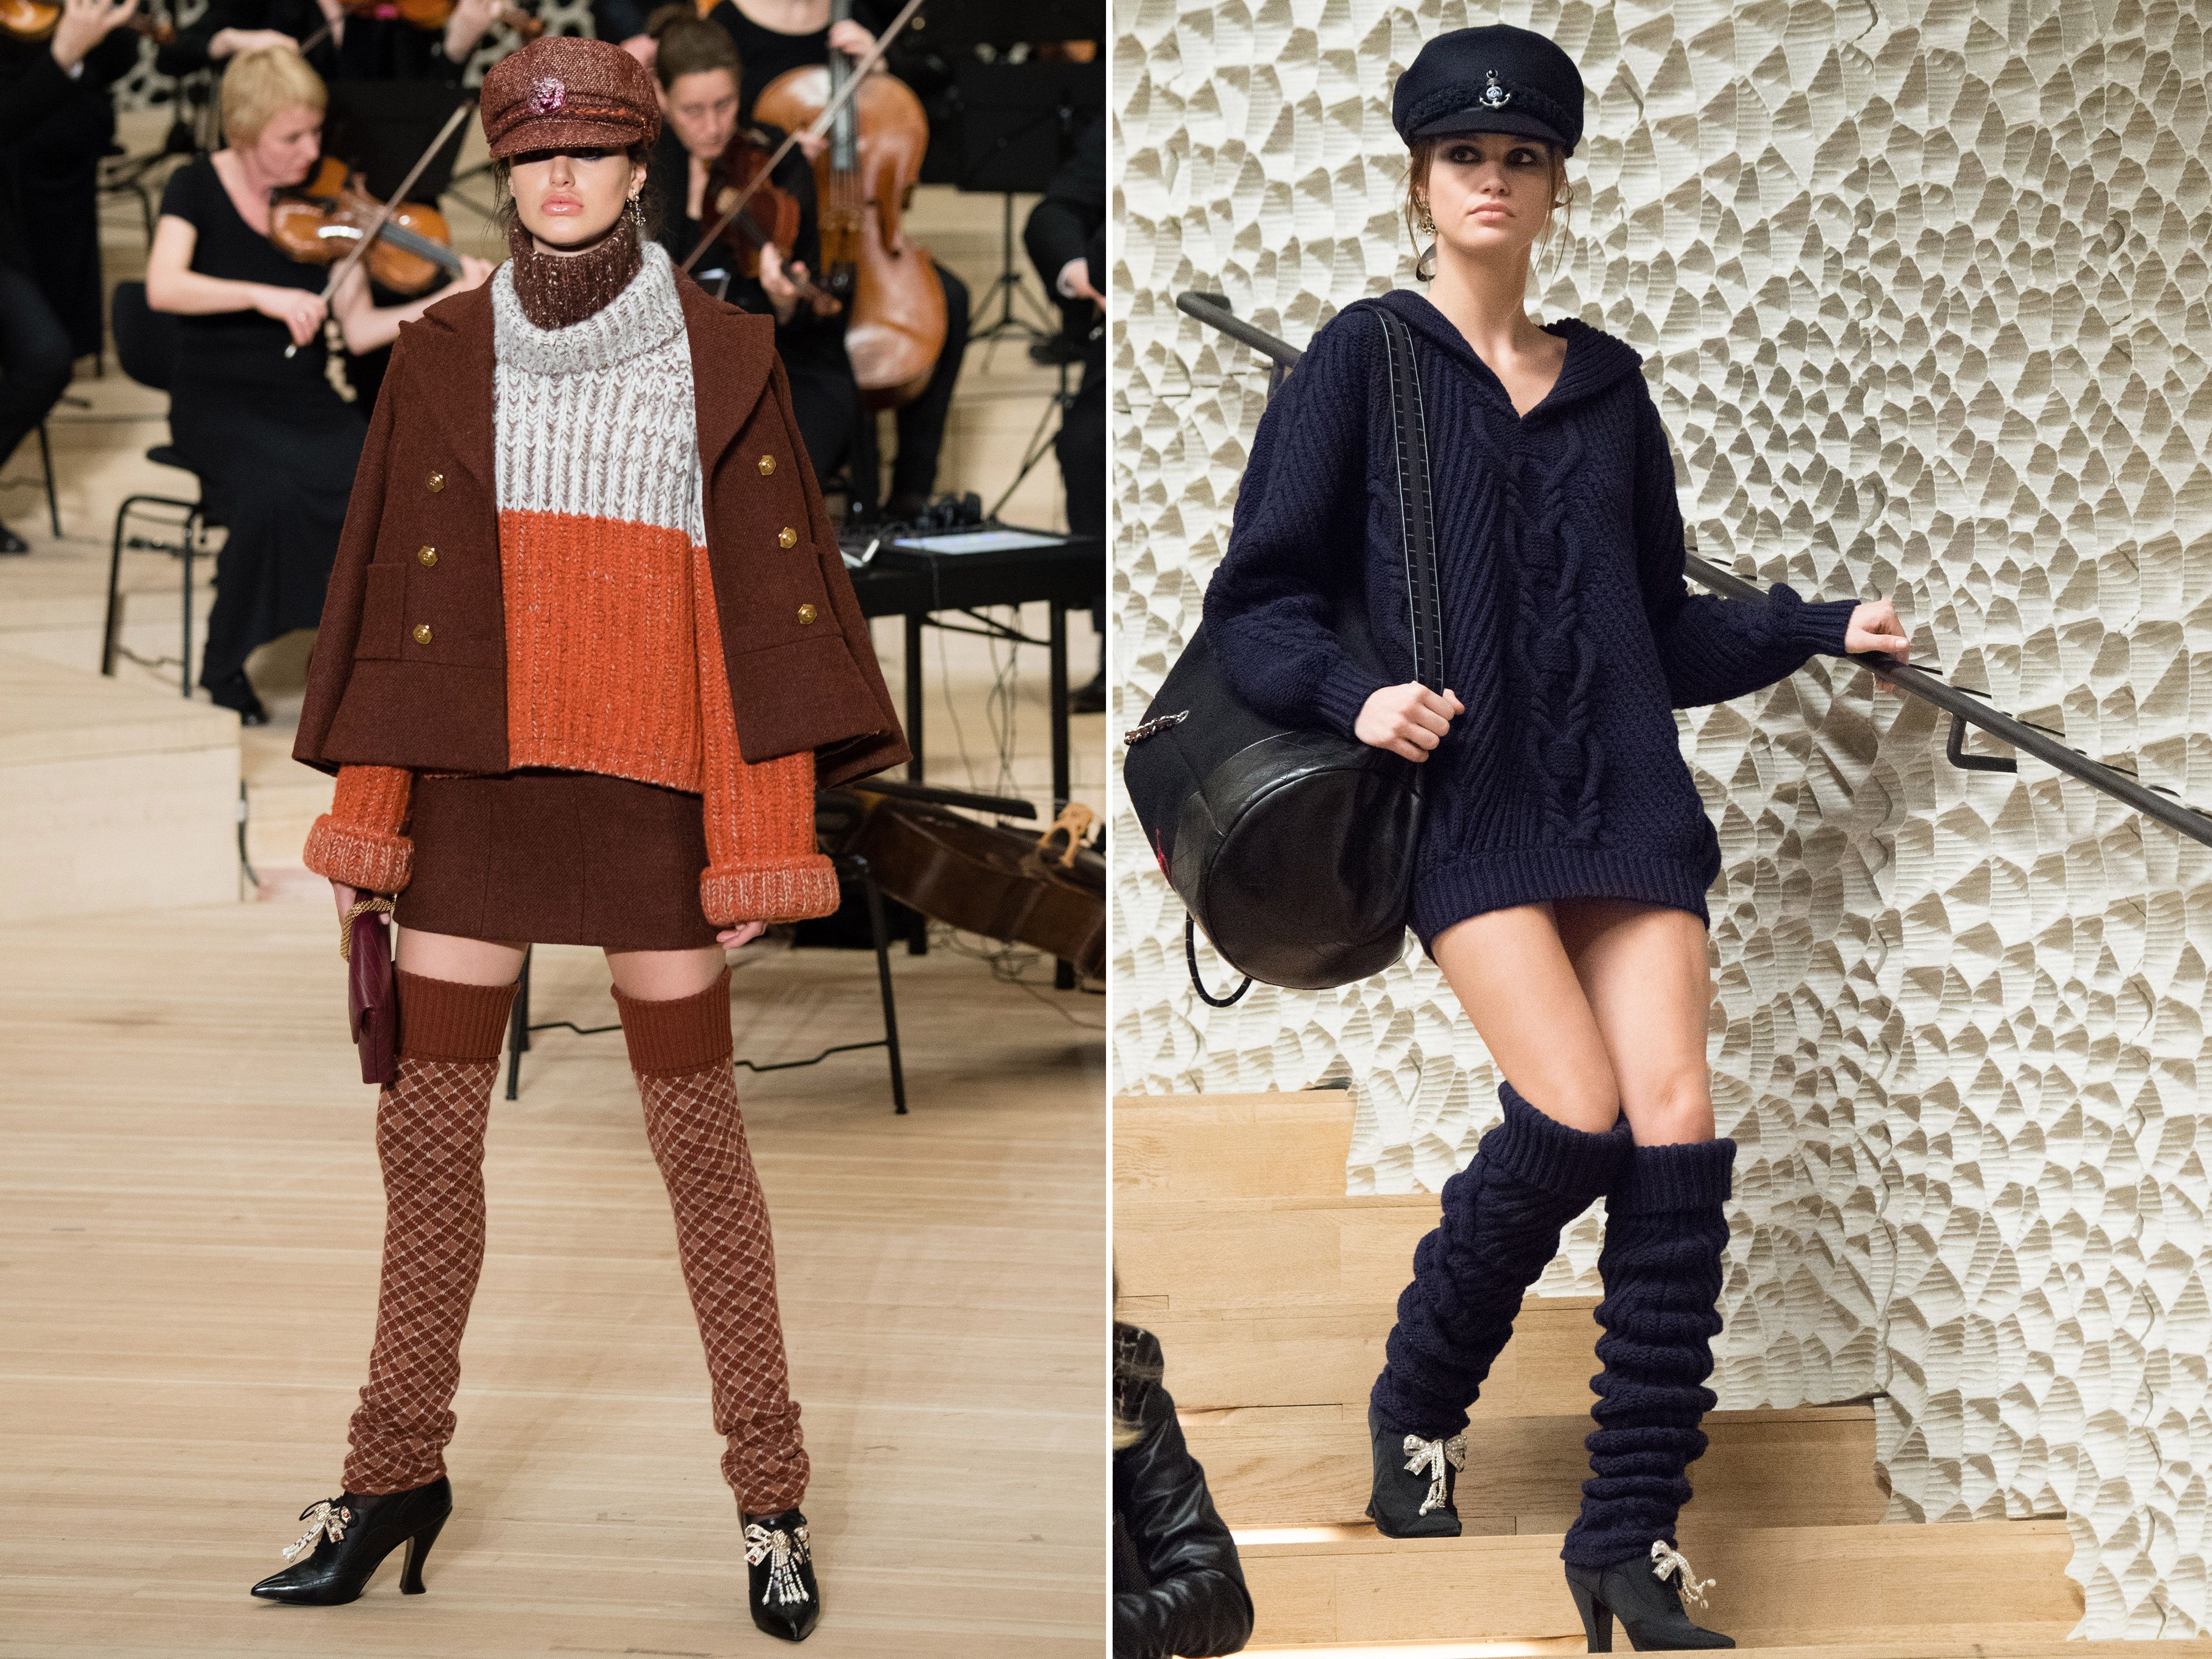 Chanel and Kaia Gerber herald the return of leg warmers